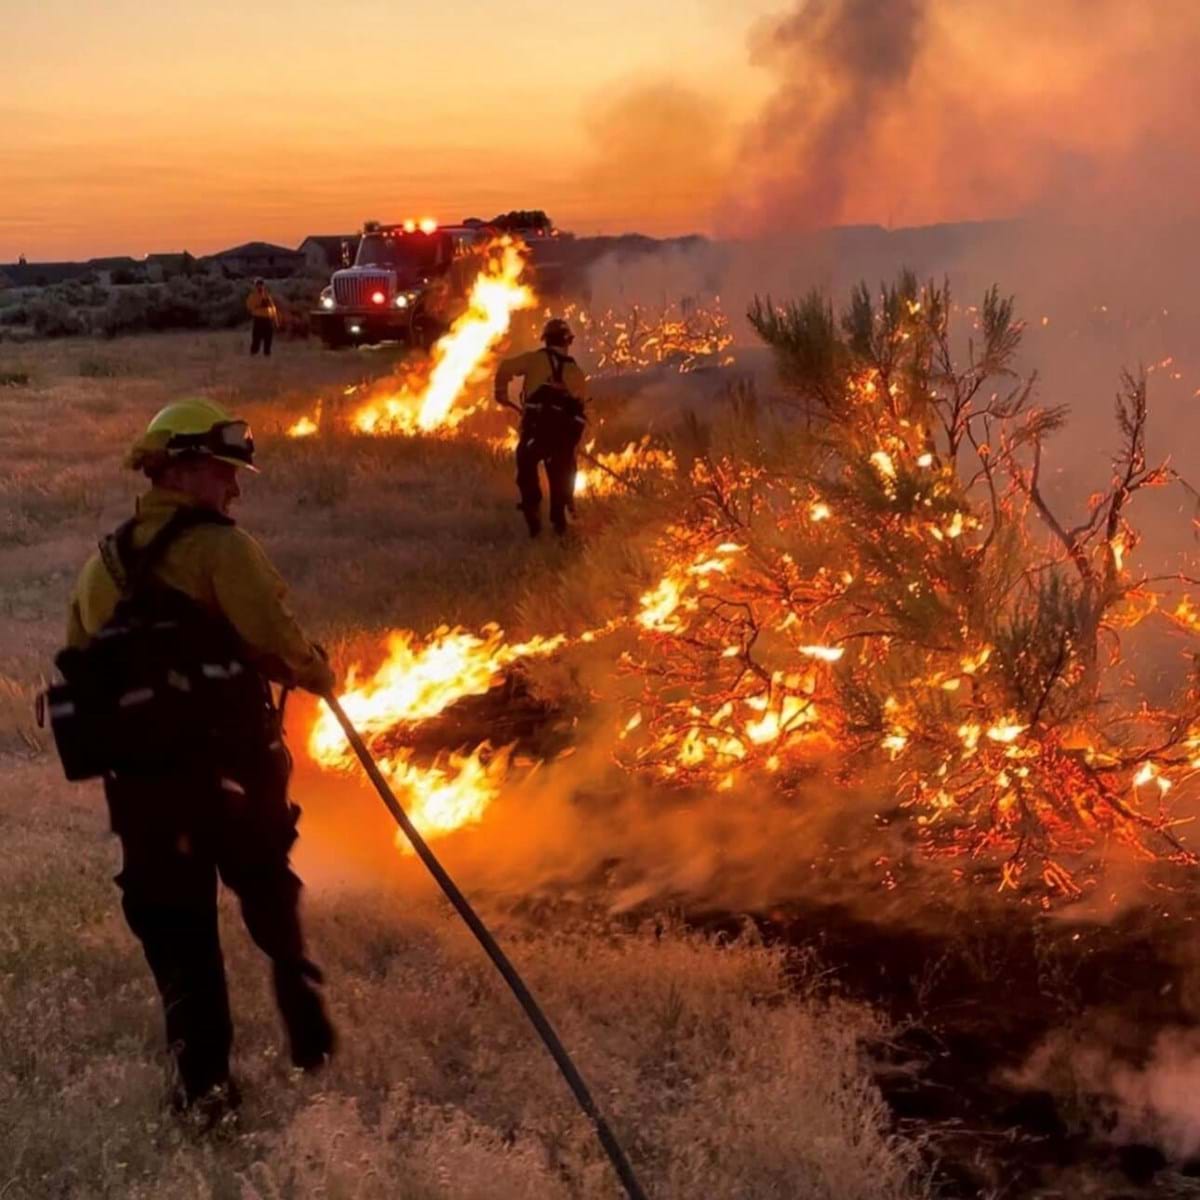 Firefighters in the foothills battling a wildfire.